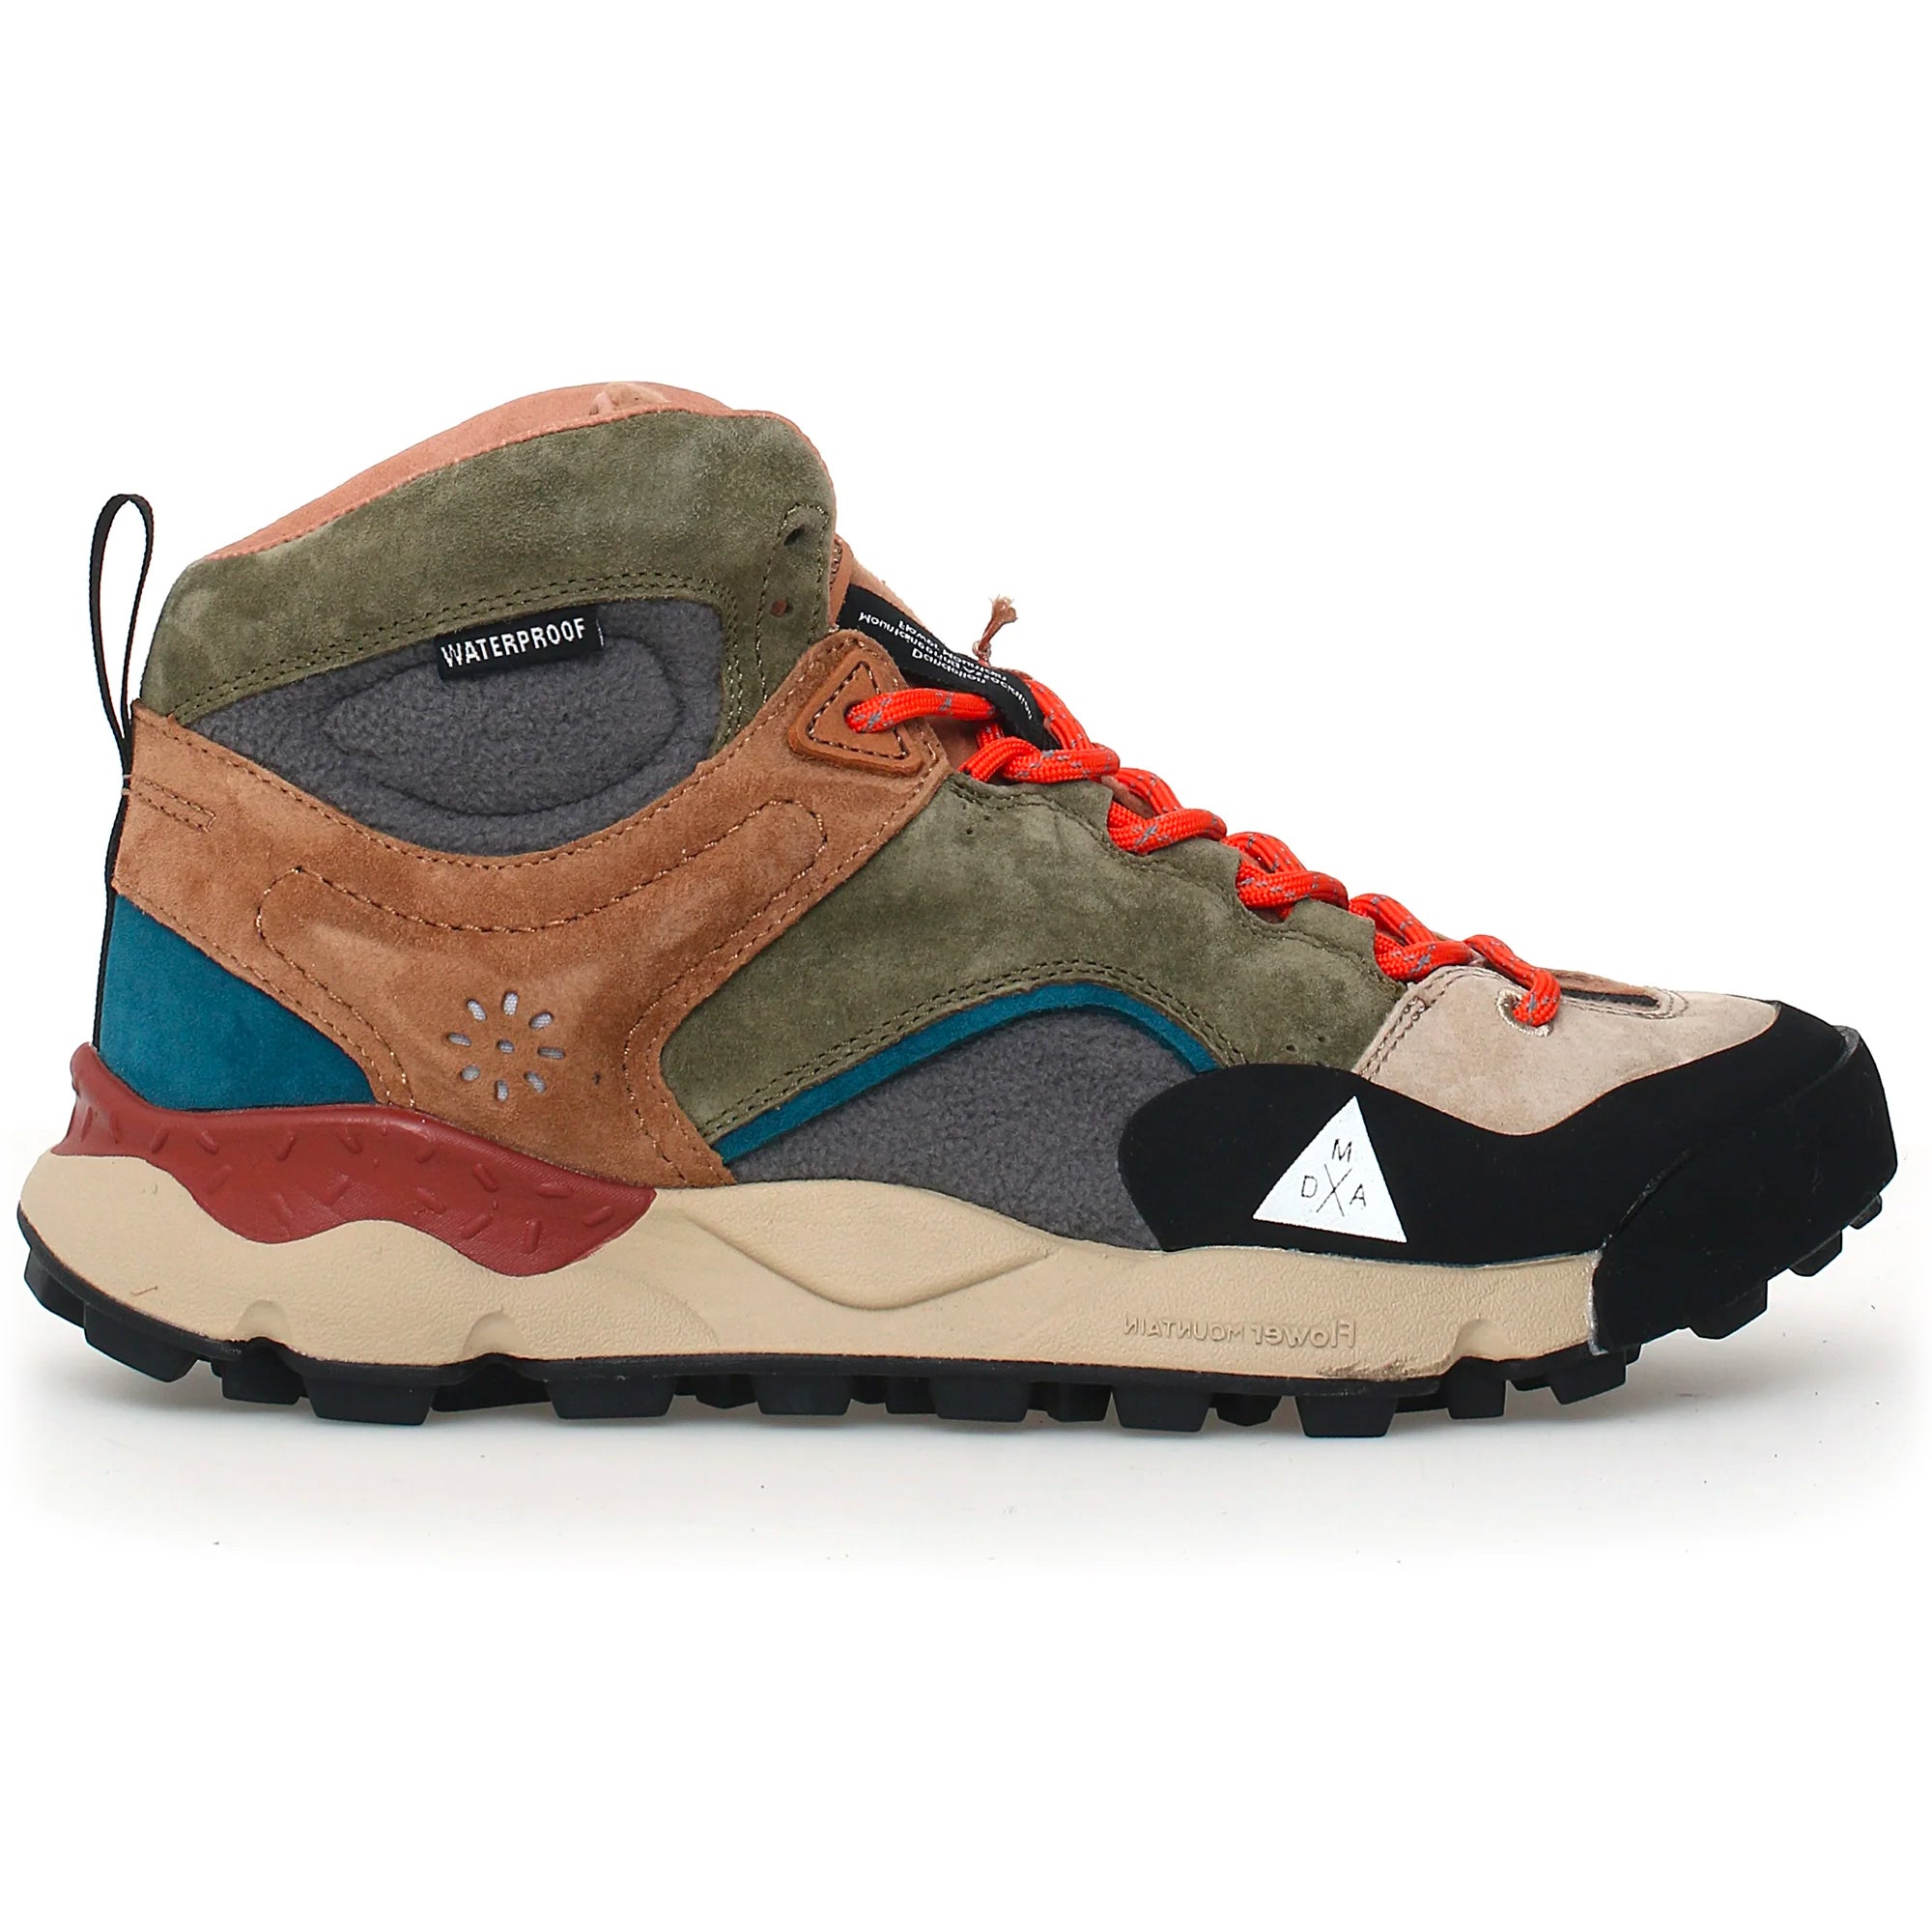 Flower Mountain Back Country Mid Waterproof Trainers - Beige / Military